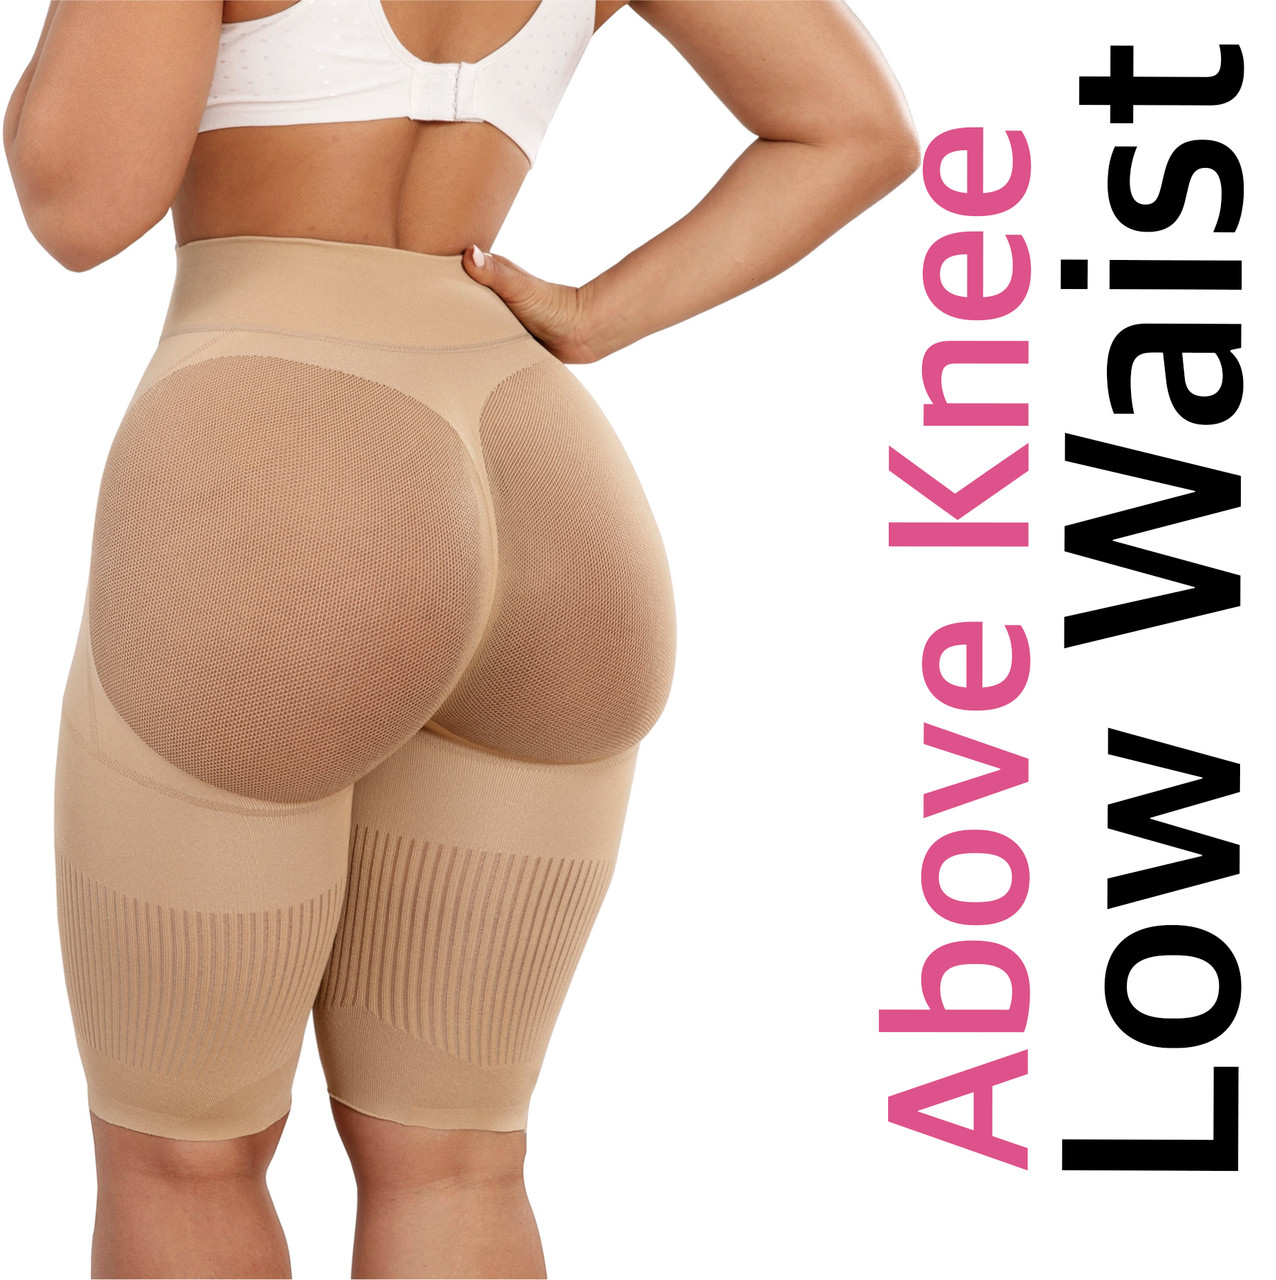 😎Joshine Butt lifting shapewear smooths the look of your stomach,gives  your butt a nice rounder, fuller shape without making it look  fake.Skin-friendly to wear all day long,let you enjoy your beauty  comfortablly